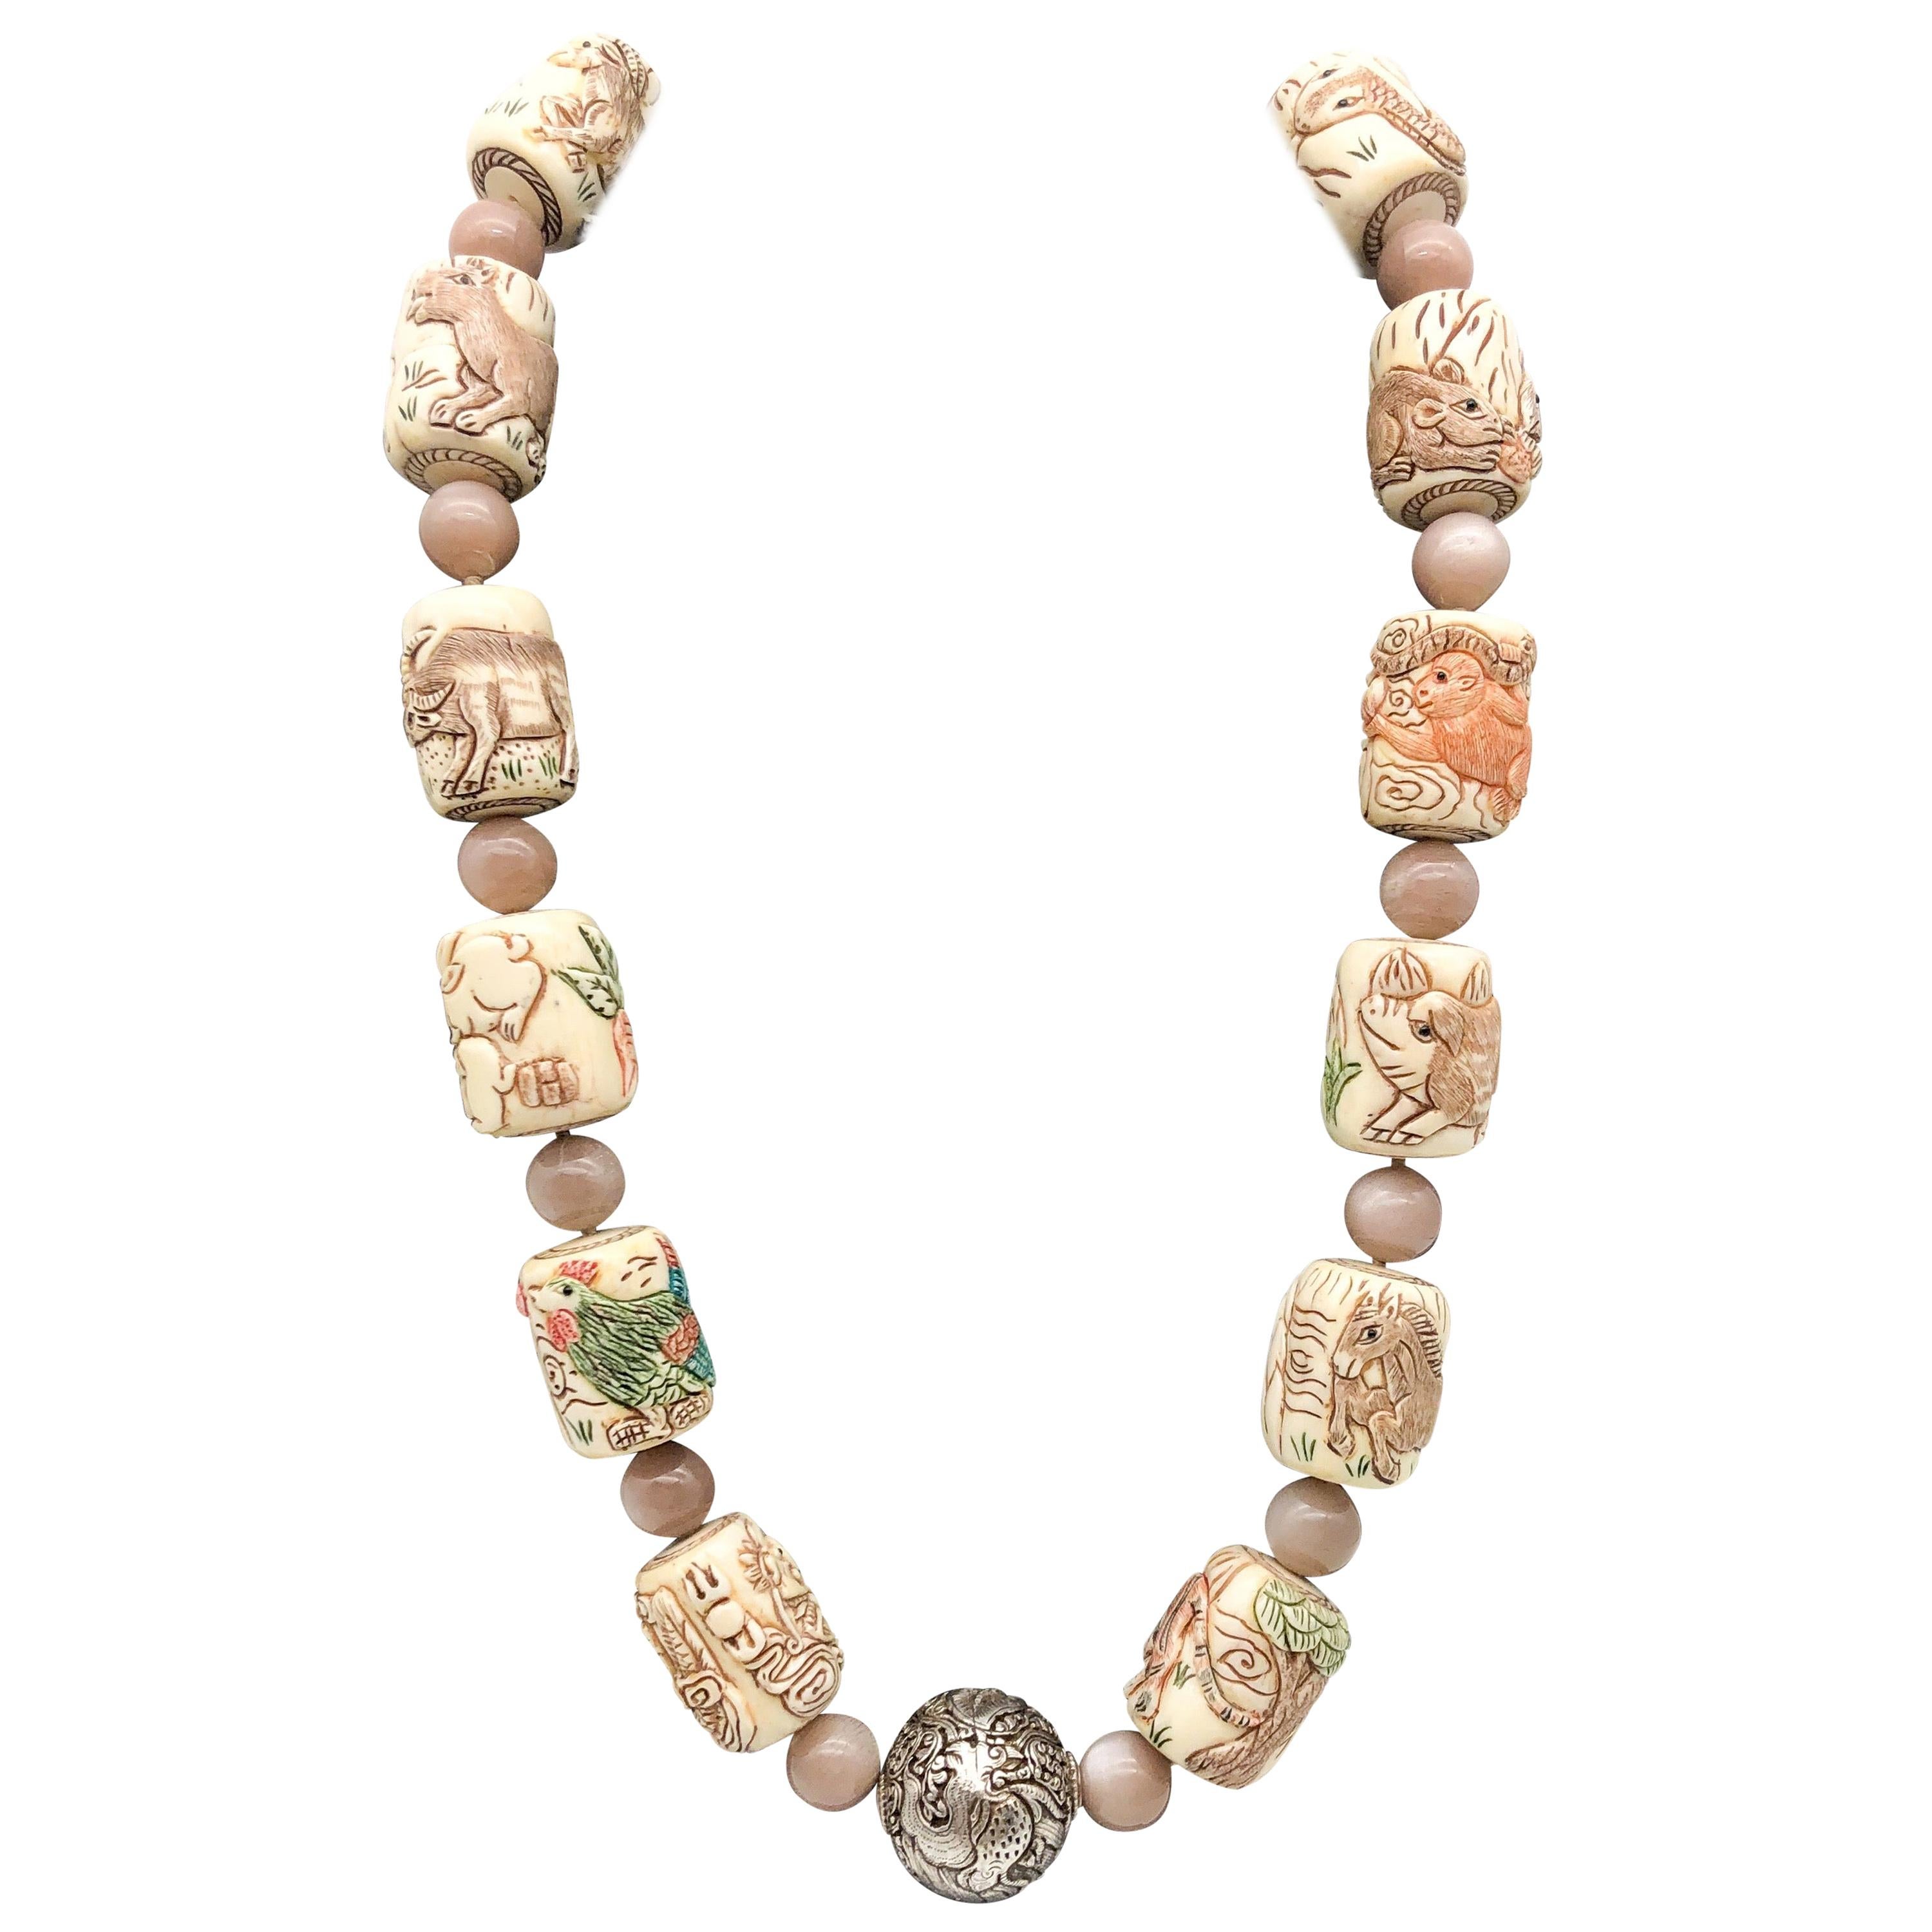 A.Jeschel Moonstone necklace with Chinese Zodiac symbols For Sale